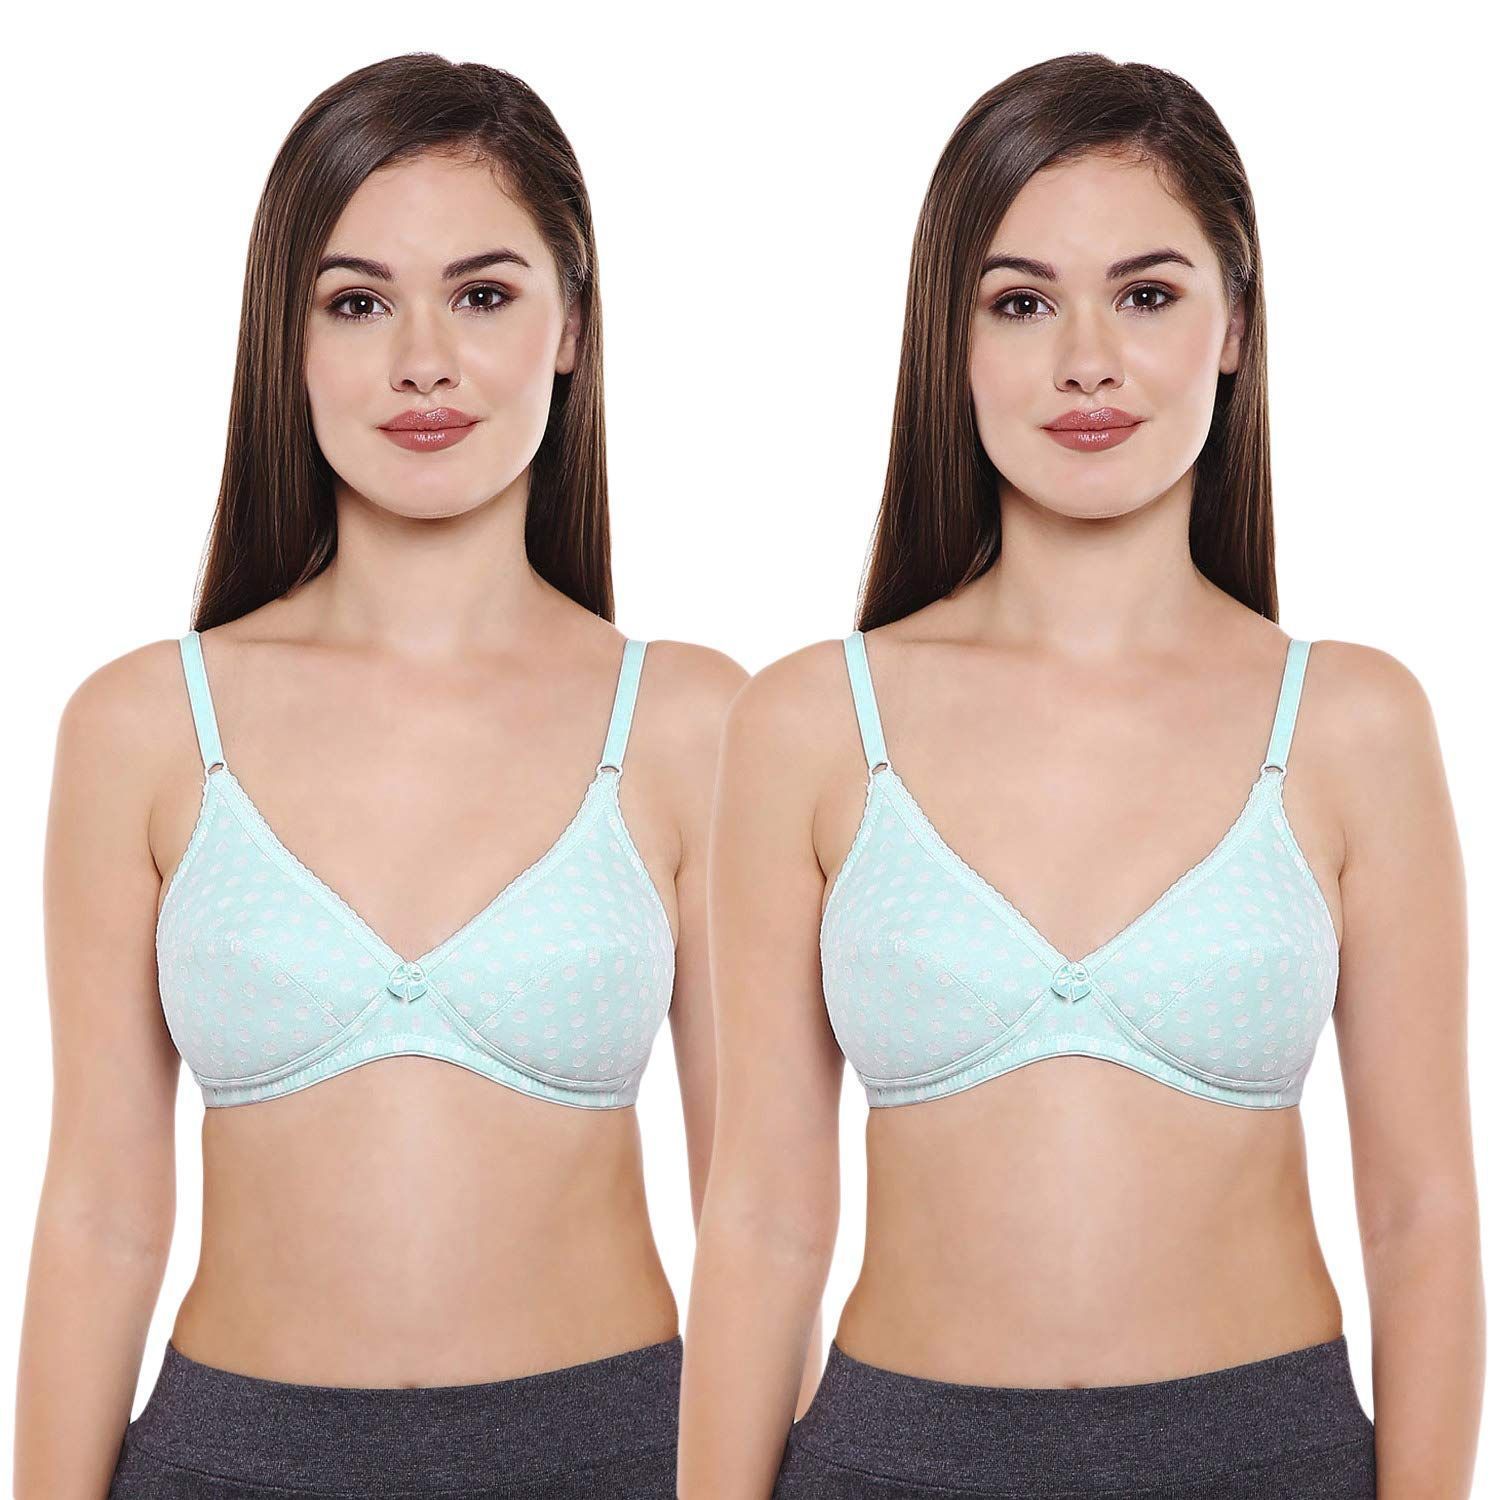 BODYCARE Women's Cotton Heavily Padded Non-Wired T-Shirt Bra